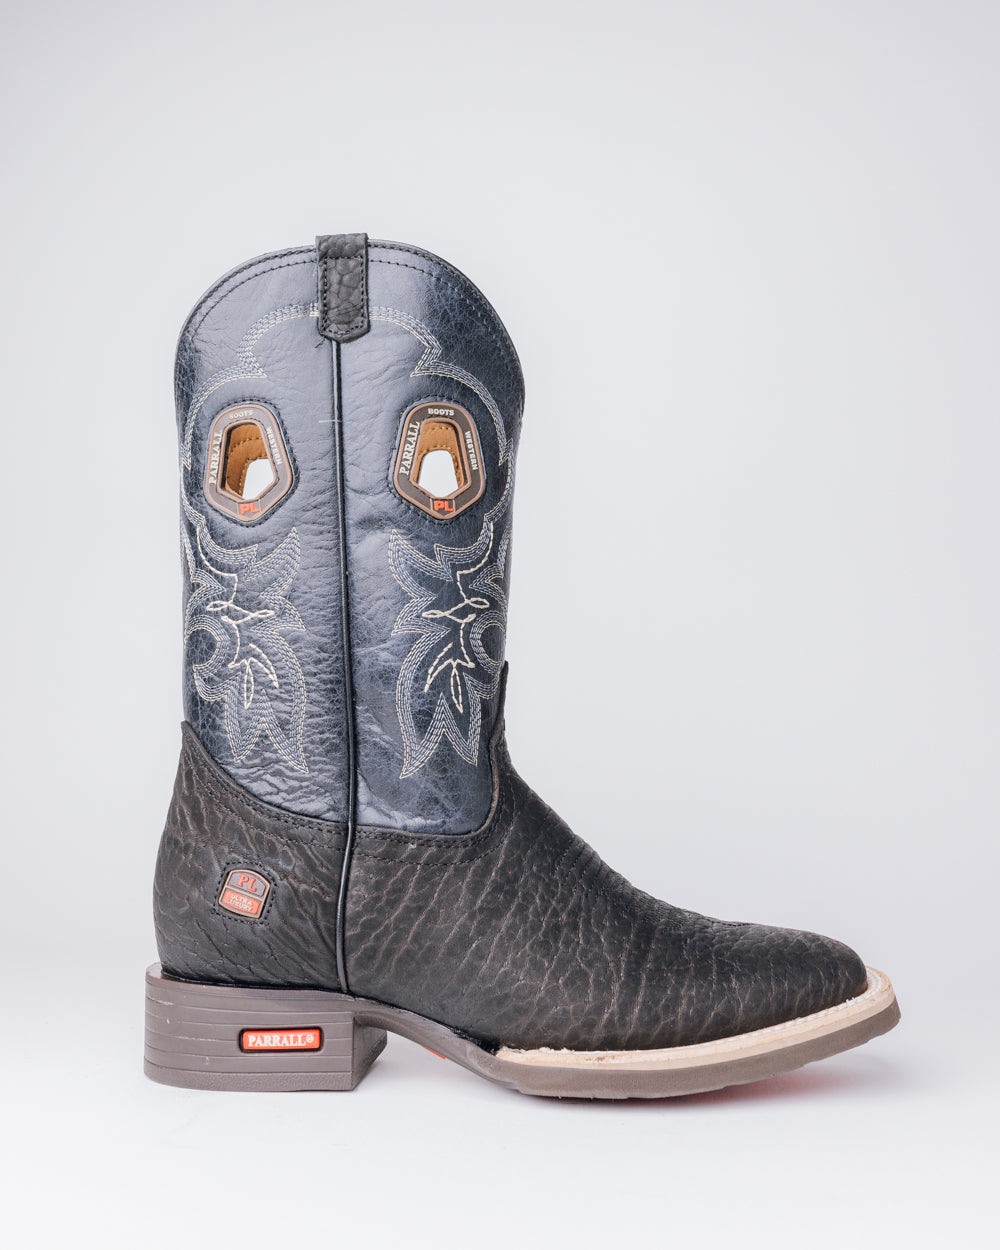 The Parral Extra Luxury Square Toe Cowboy Boot